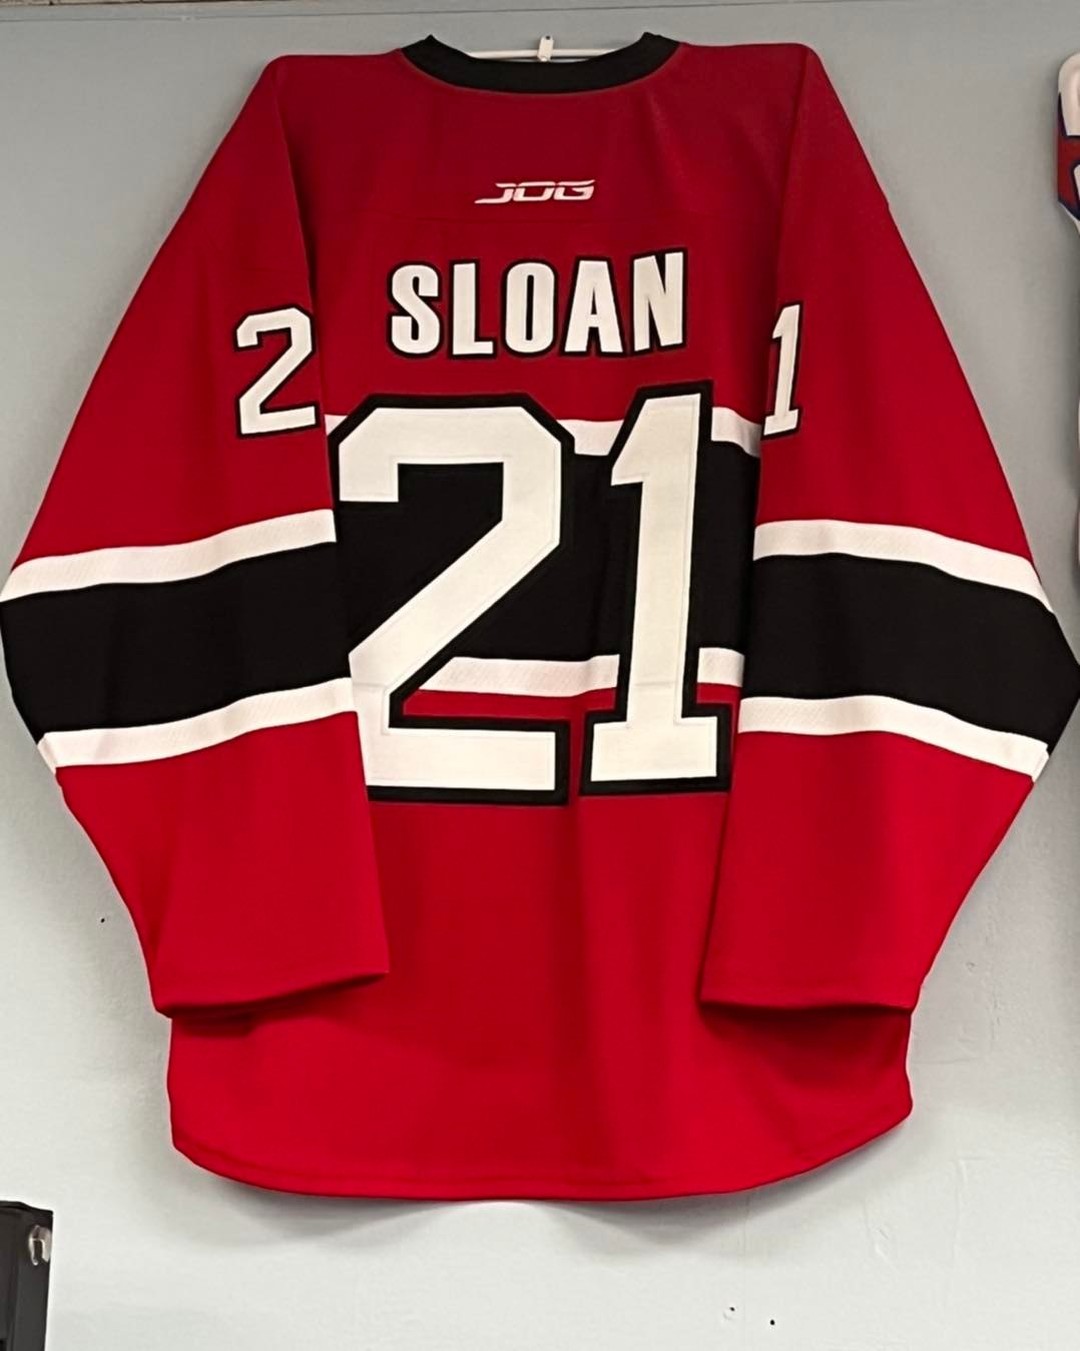 Shout out to JD Strength Performance for ordering and displaying a replica Tim Sloan jersey.  Tim Sloan from our D1 team has trained with them for years.  We’ll be re-opening our on-line store again in time for next season.  https://www.facebook.com/JDStrengthPerformance/